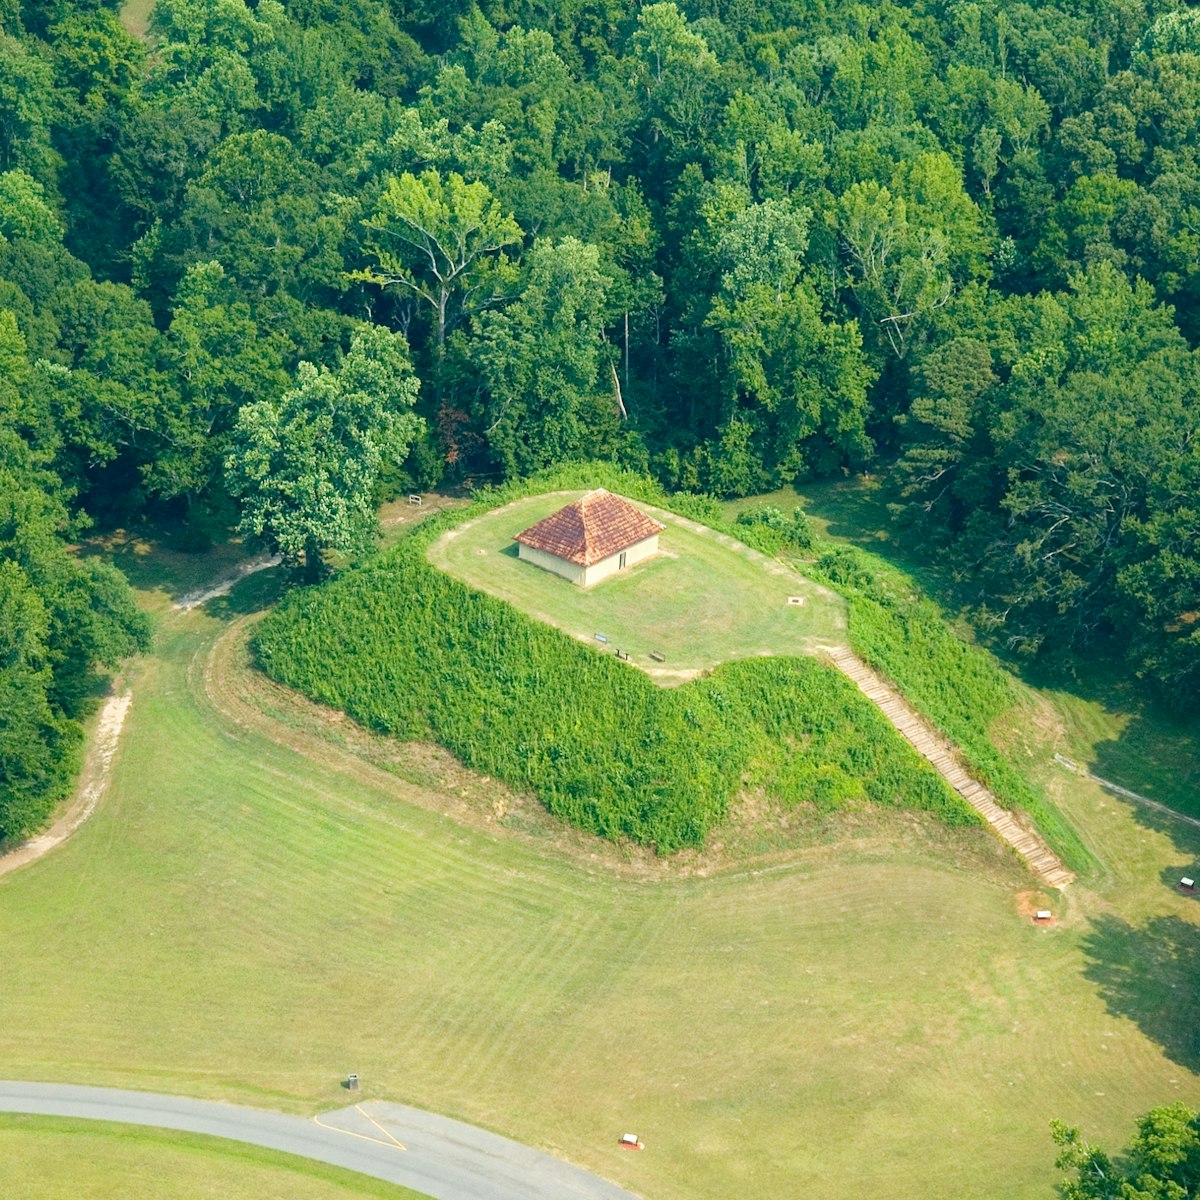 Moundville Park is a historical site of Native American mound dwellers.For similar images: